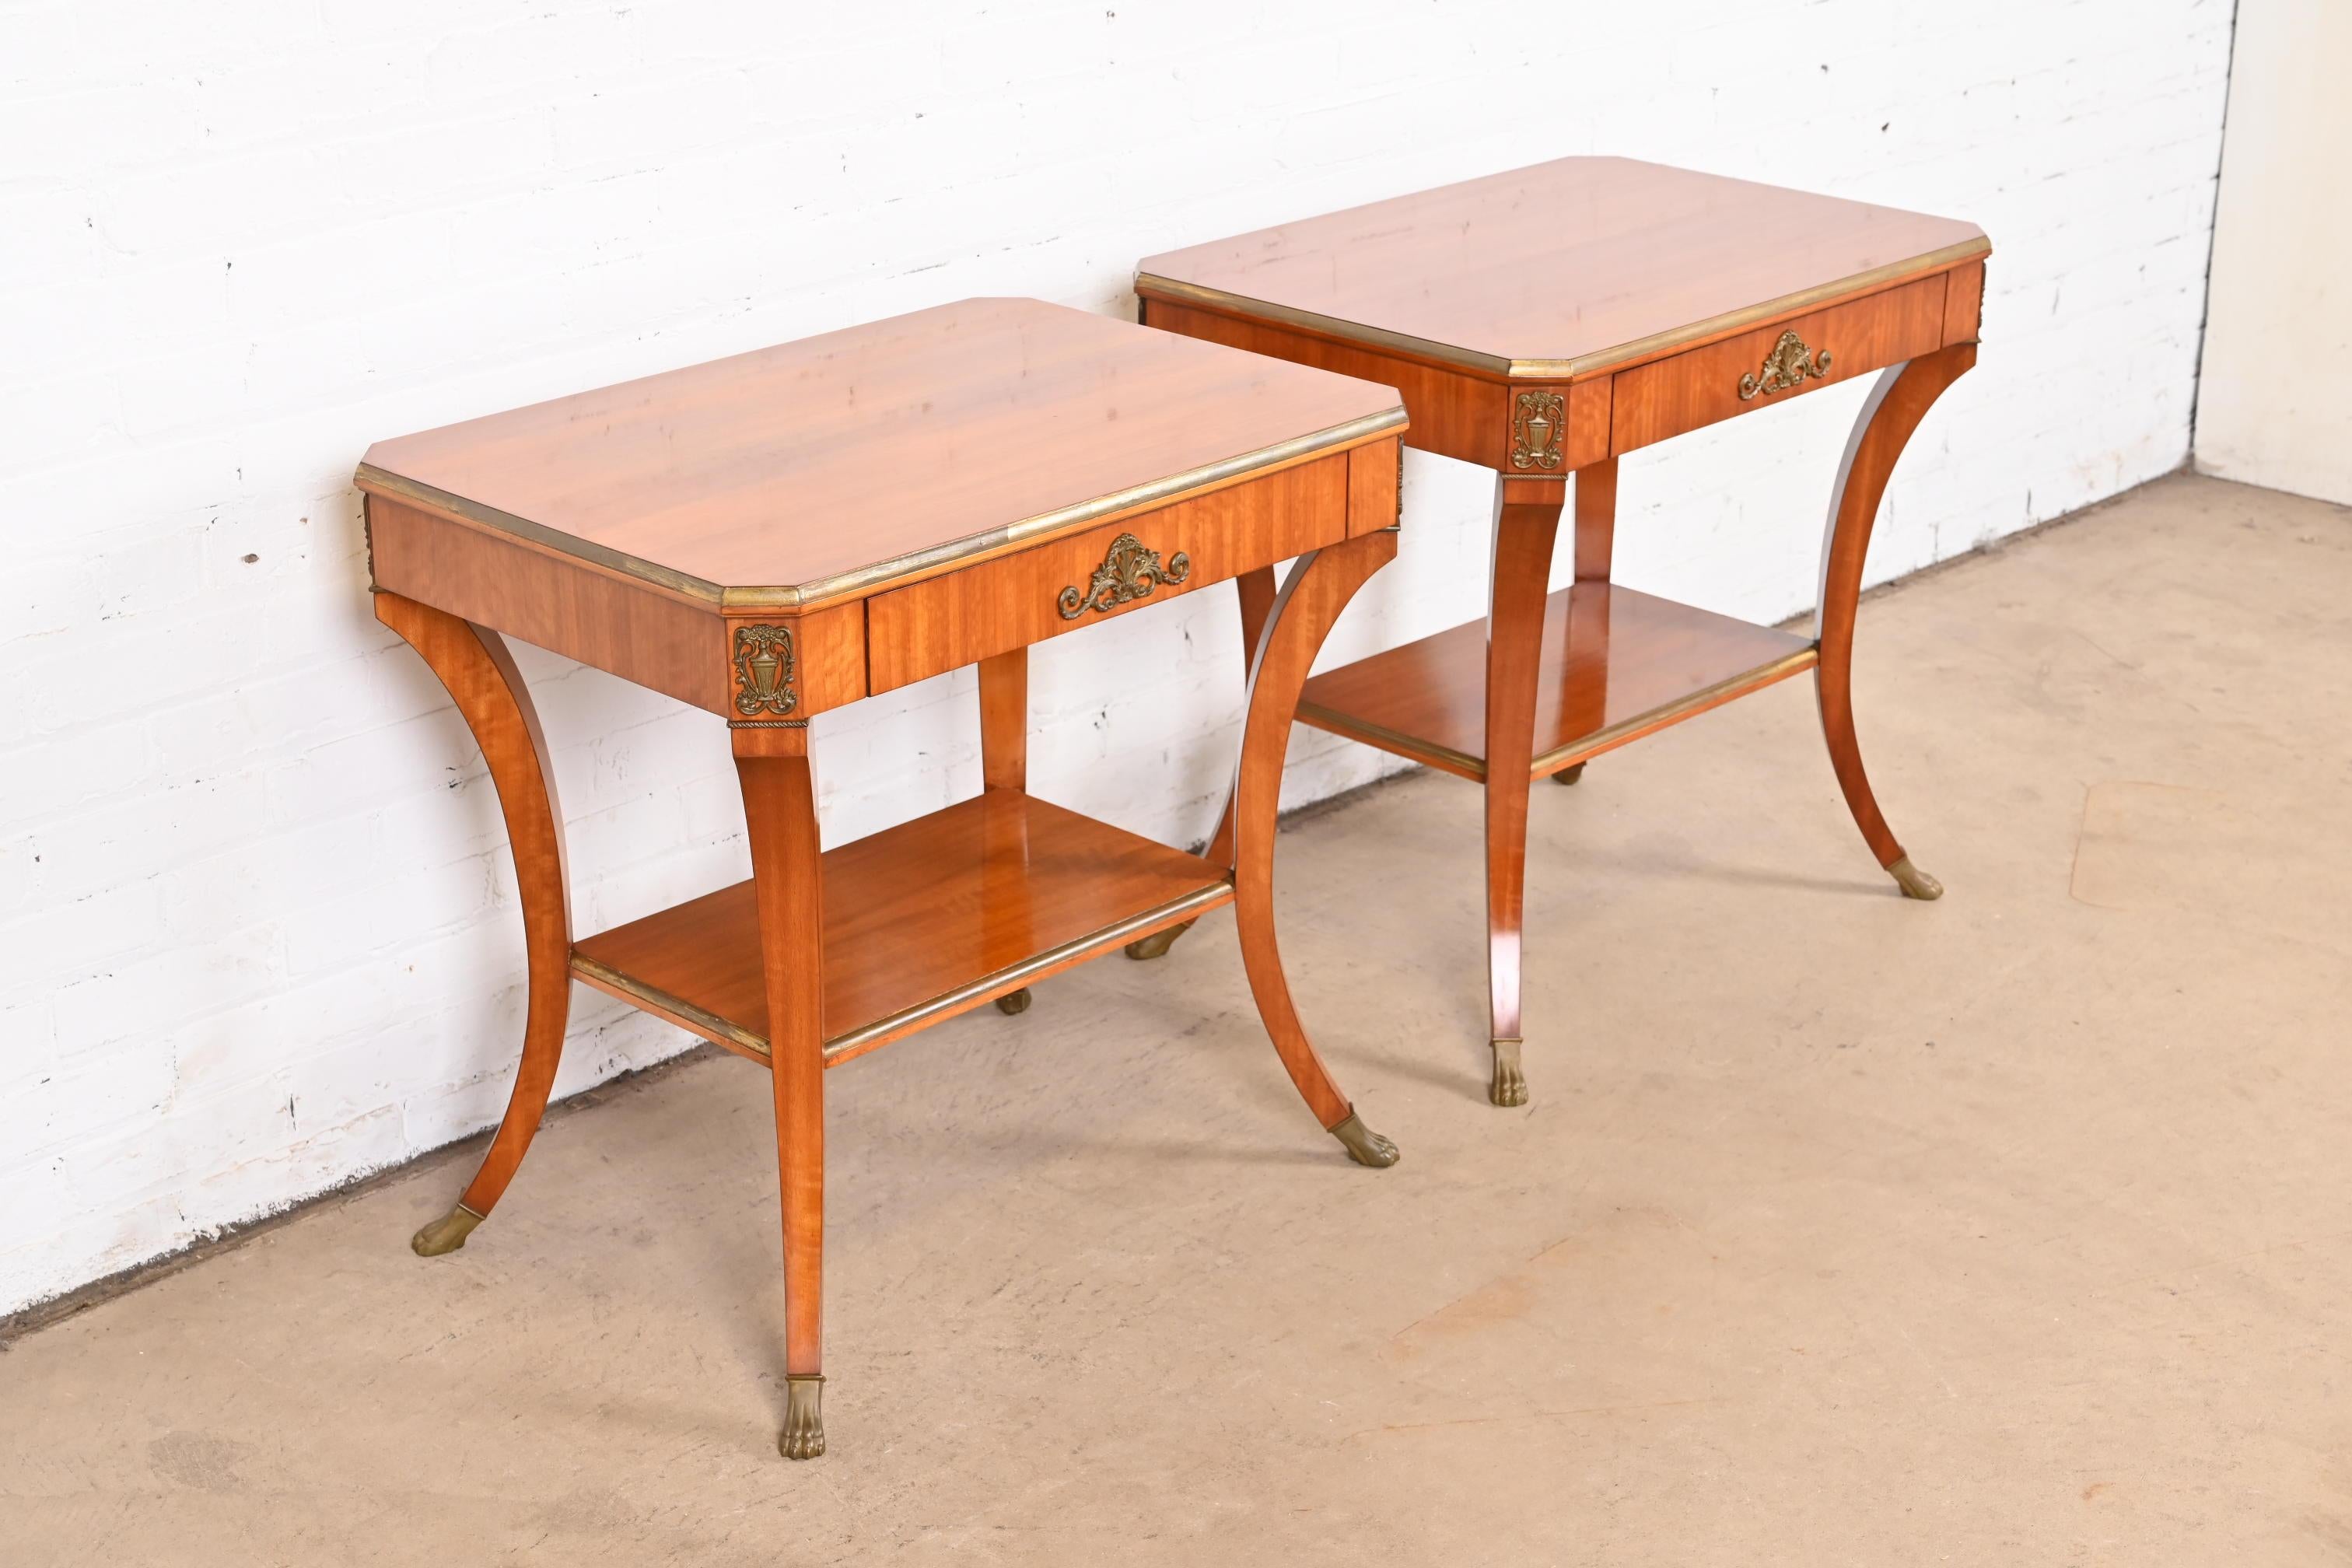 20th Century John Widdicomb French Empire Satinwood Nightstands With Mounted Ormolu, Pair For Sale